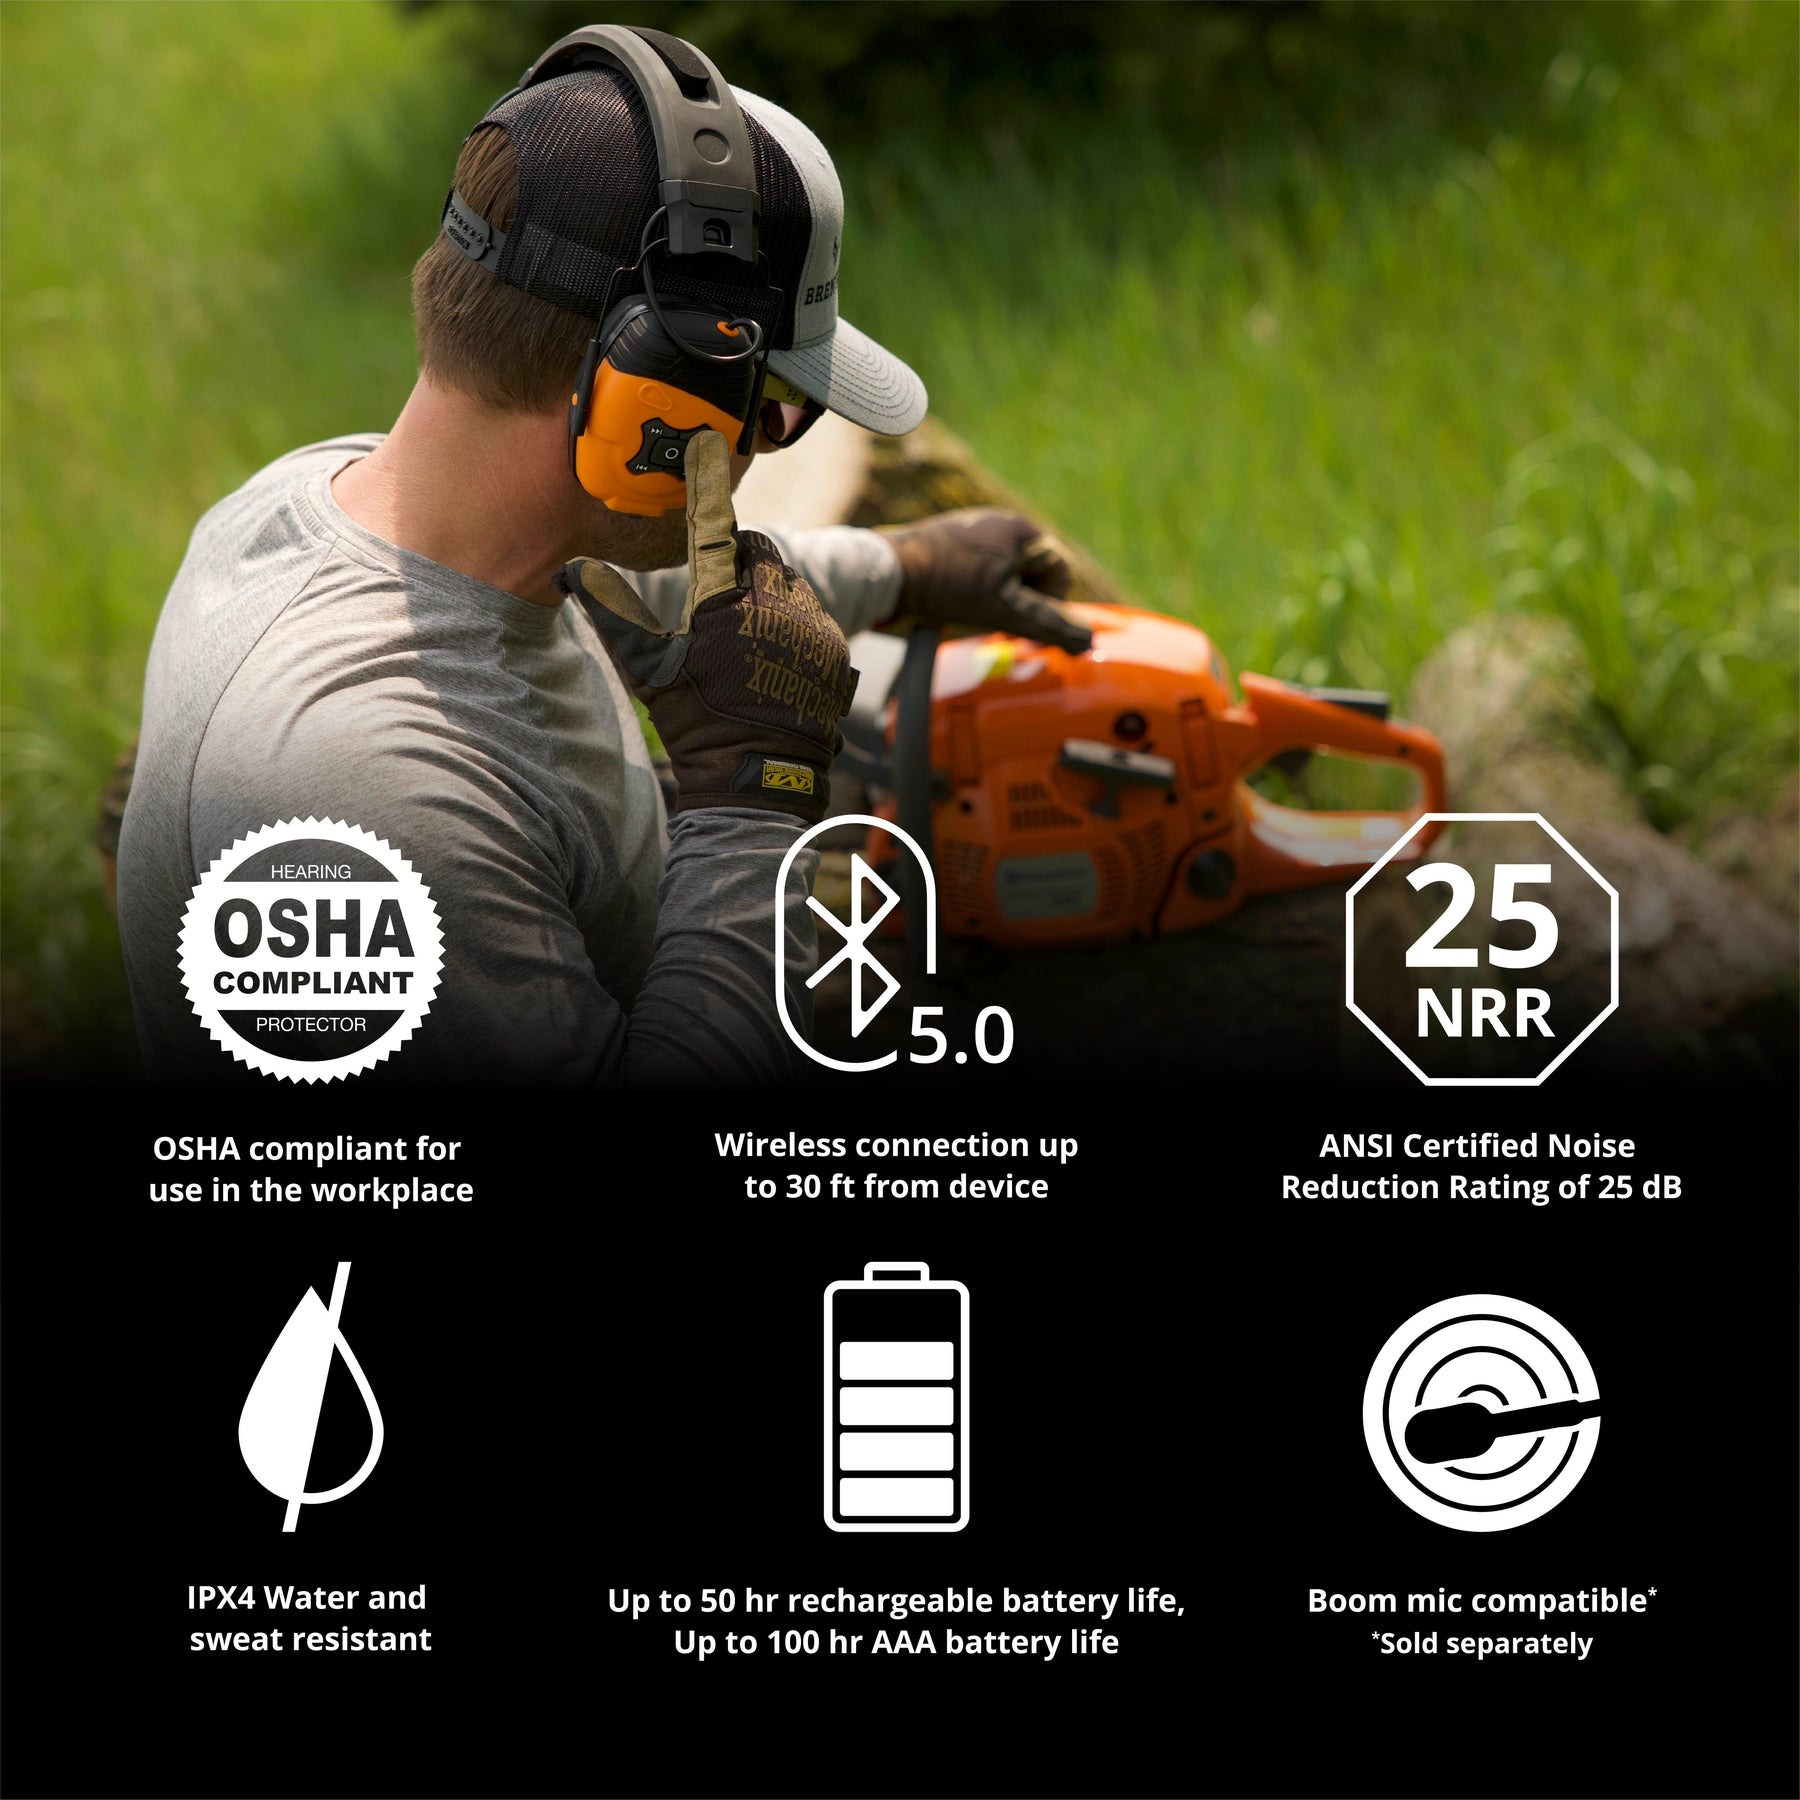 ISOtunes LINK 2 Hearing Protection Headphones Features Highlights